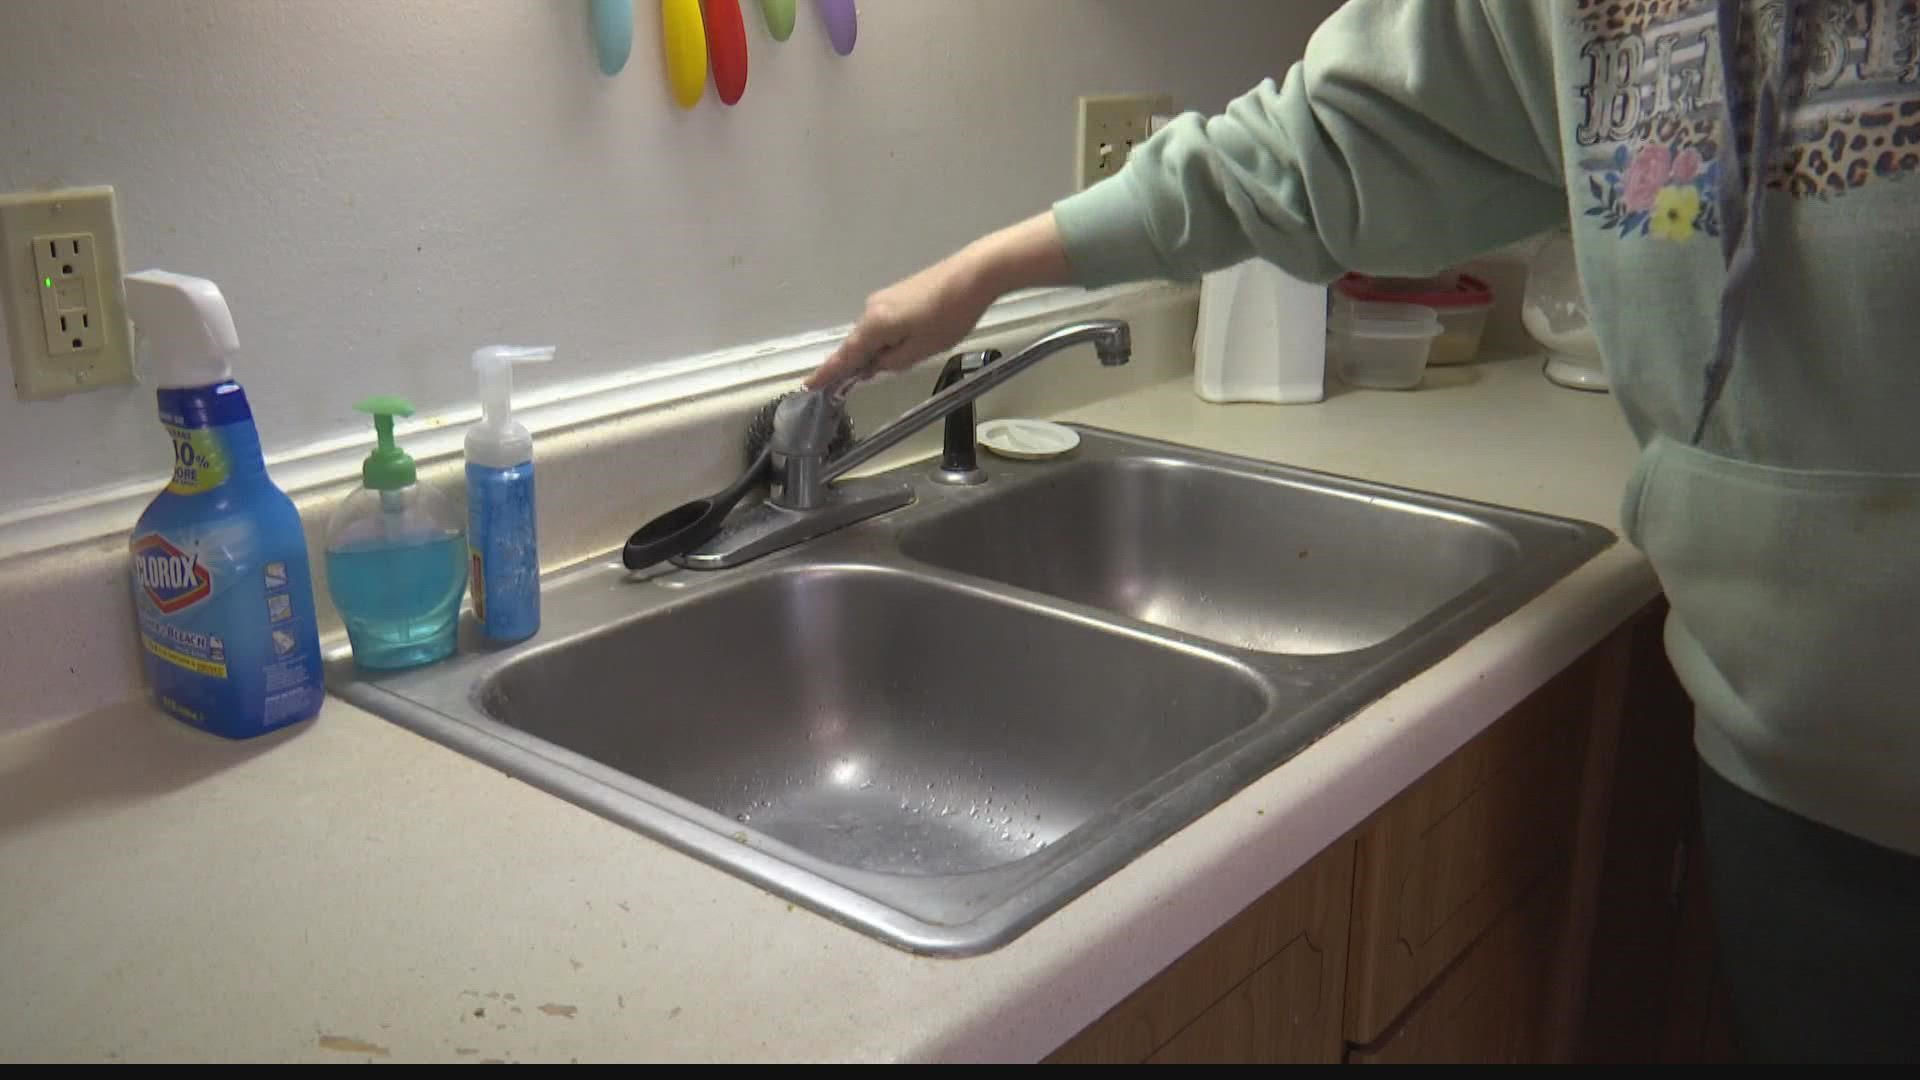 Residents say Citizens Energy Group shut off water at the complexes because management did not pay their bills.